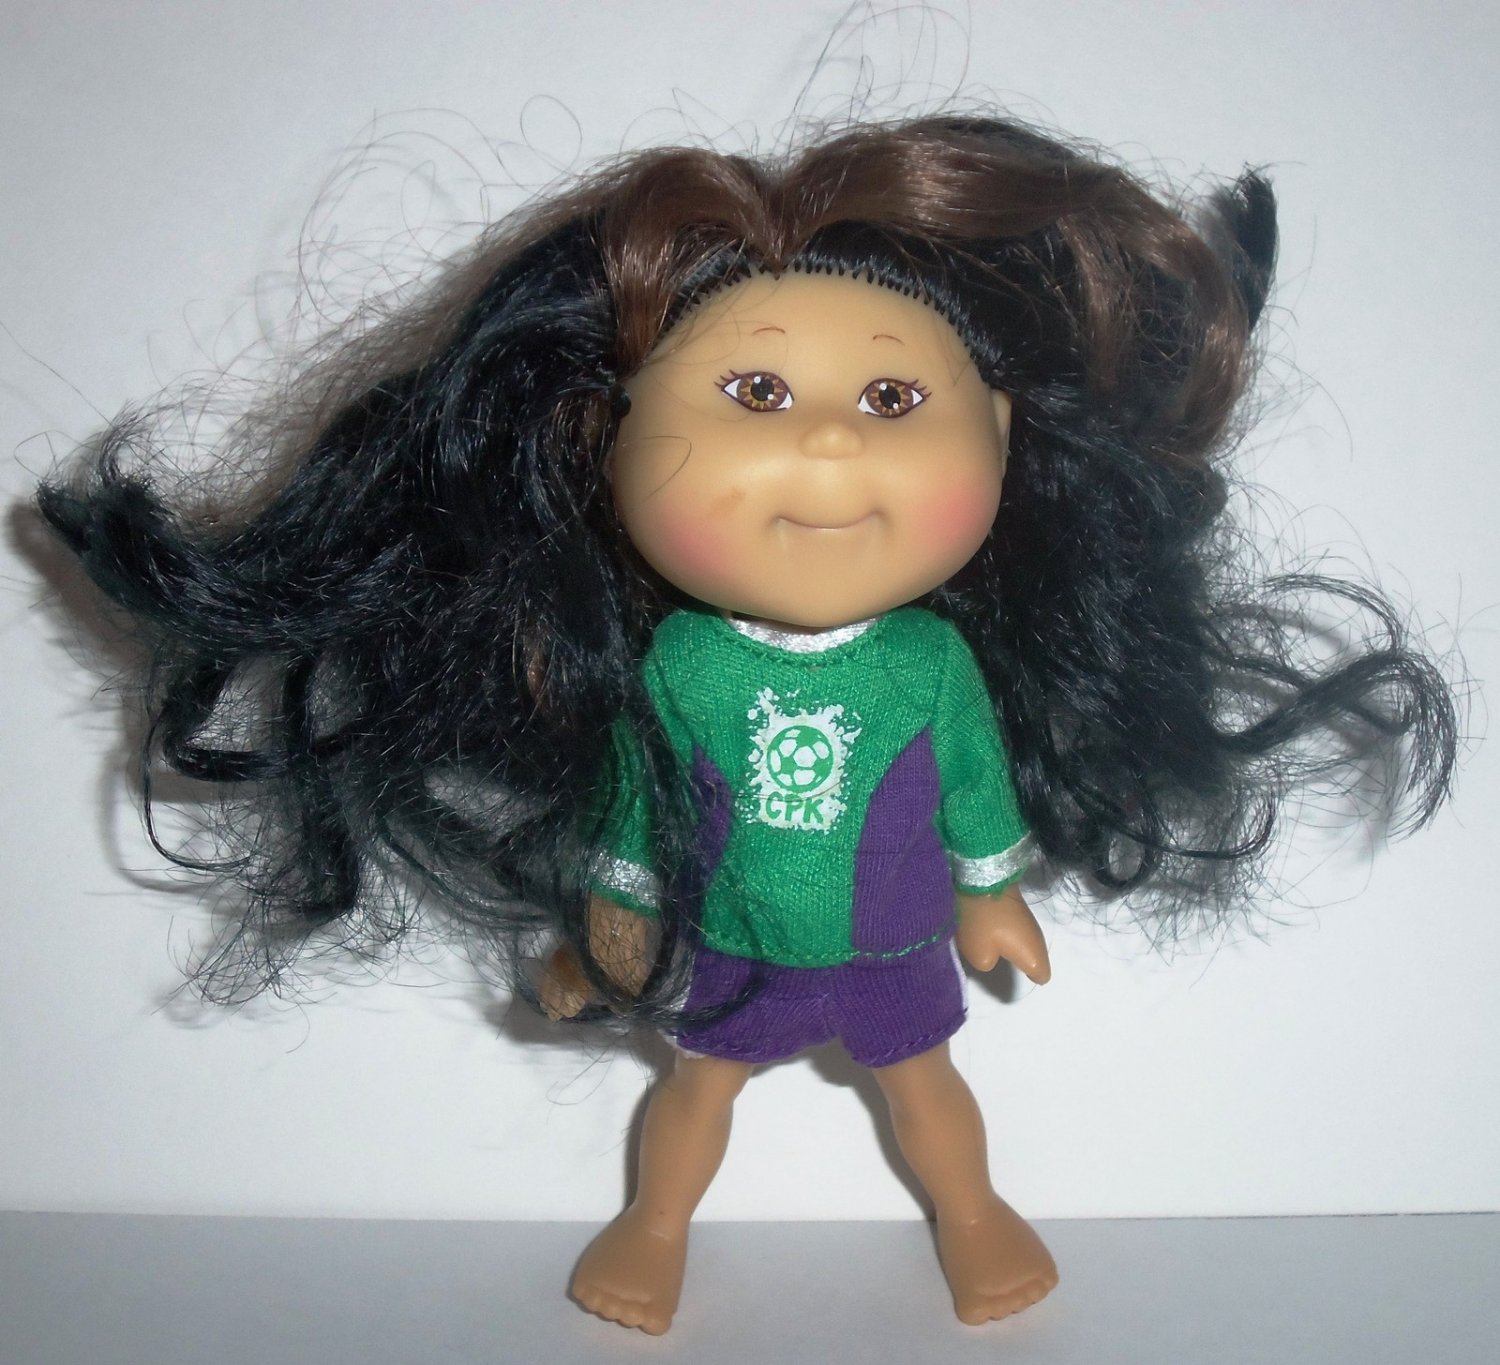 2006 cabbage patch dolls